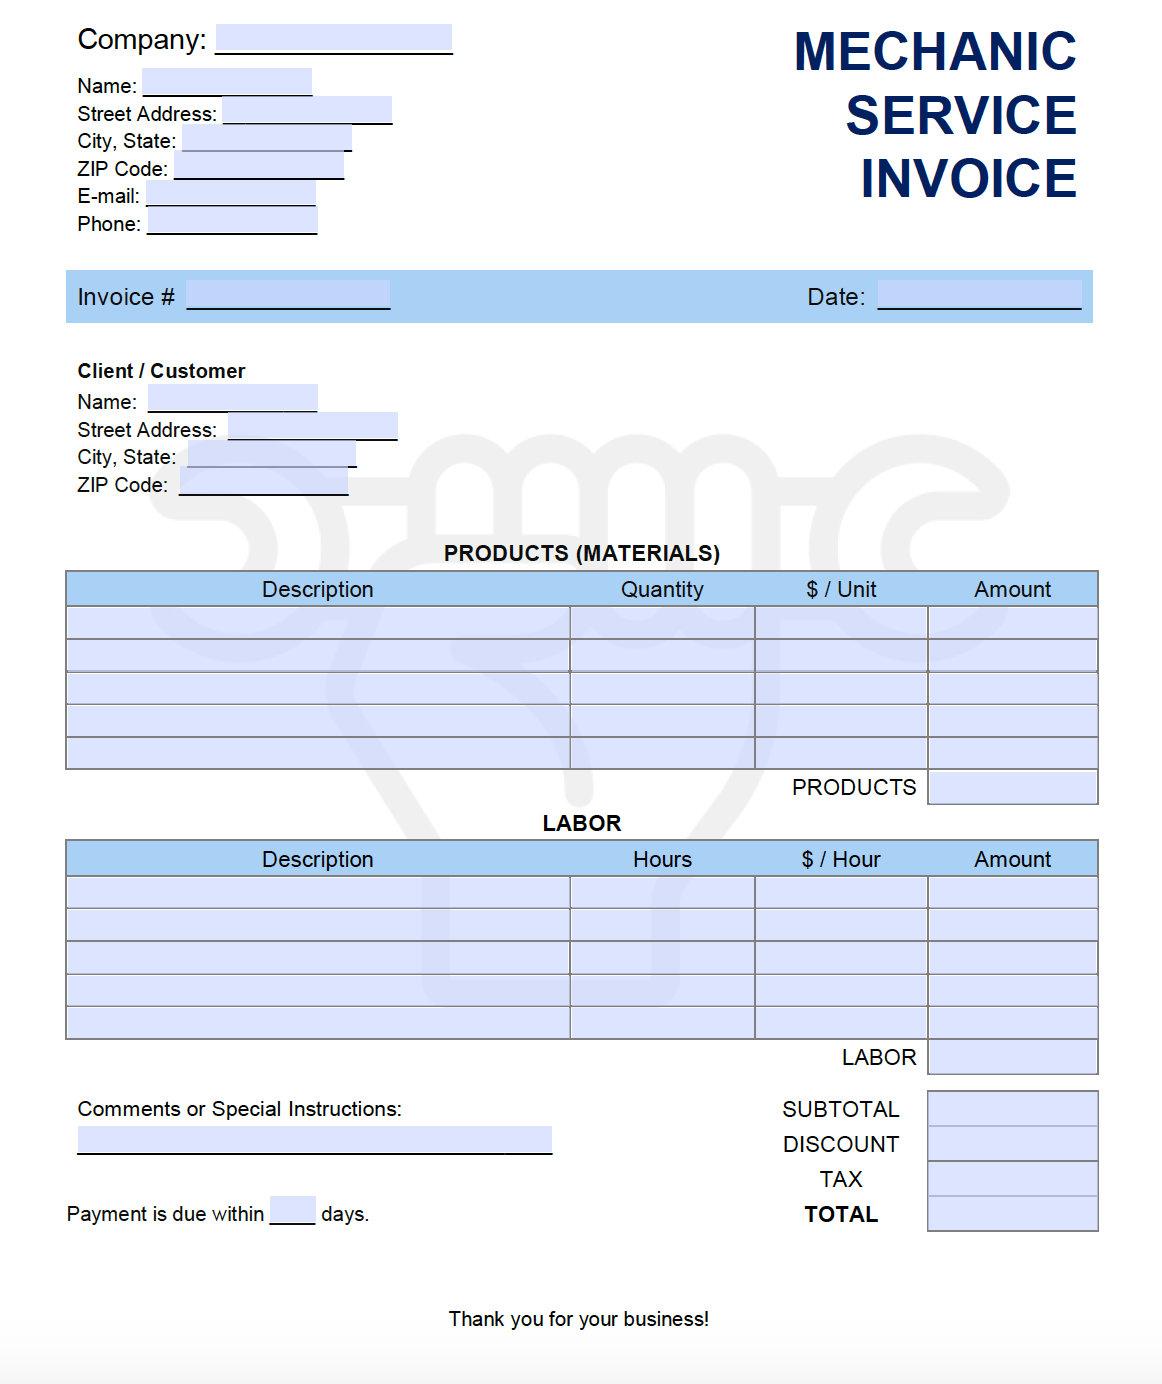 Free Mechanic (Service) Invoice Template  PDF  WORD  EXCEL Within Mechanic Job Card Template